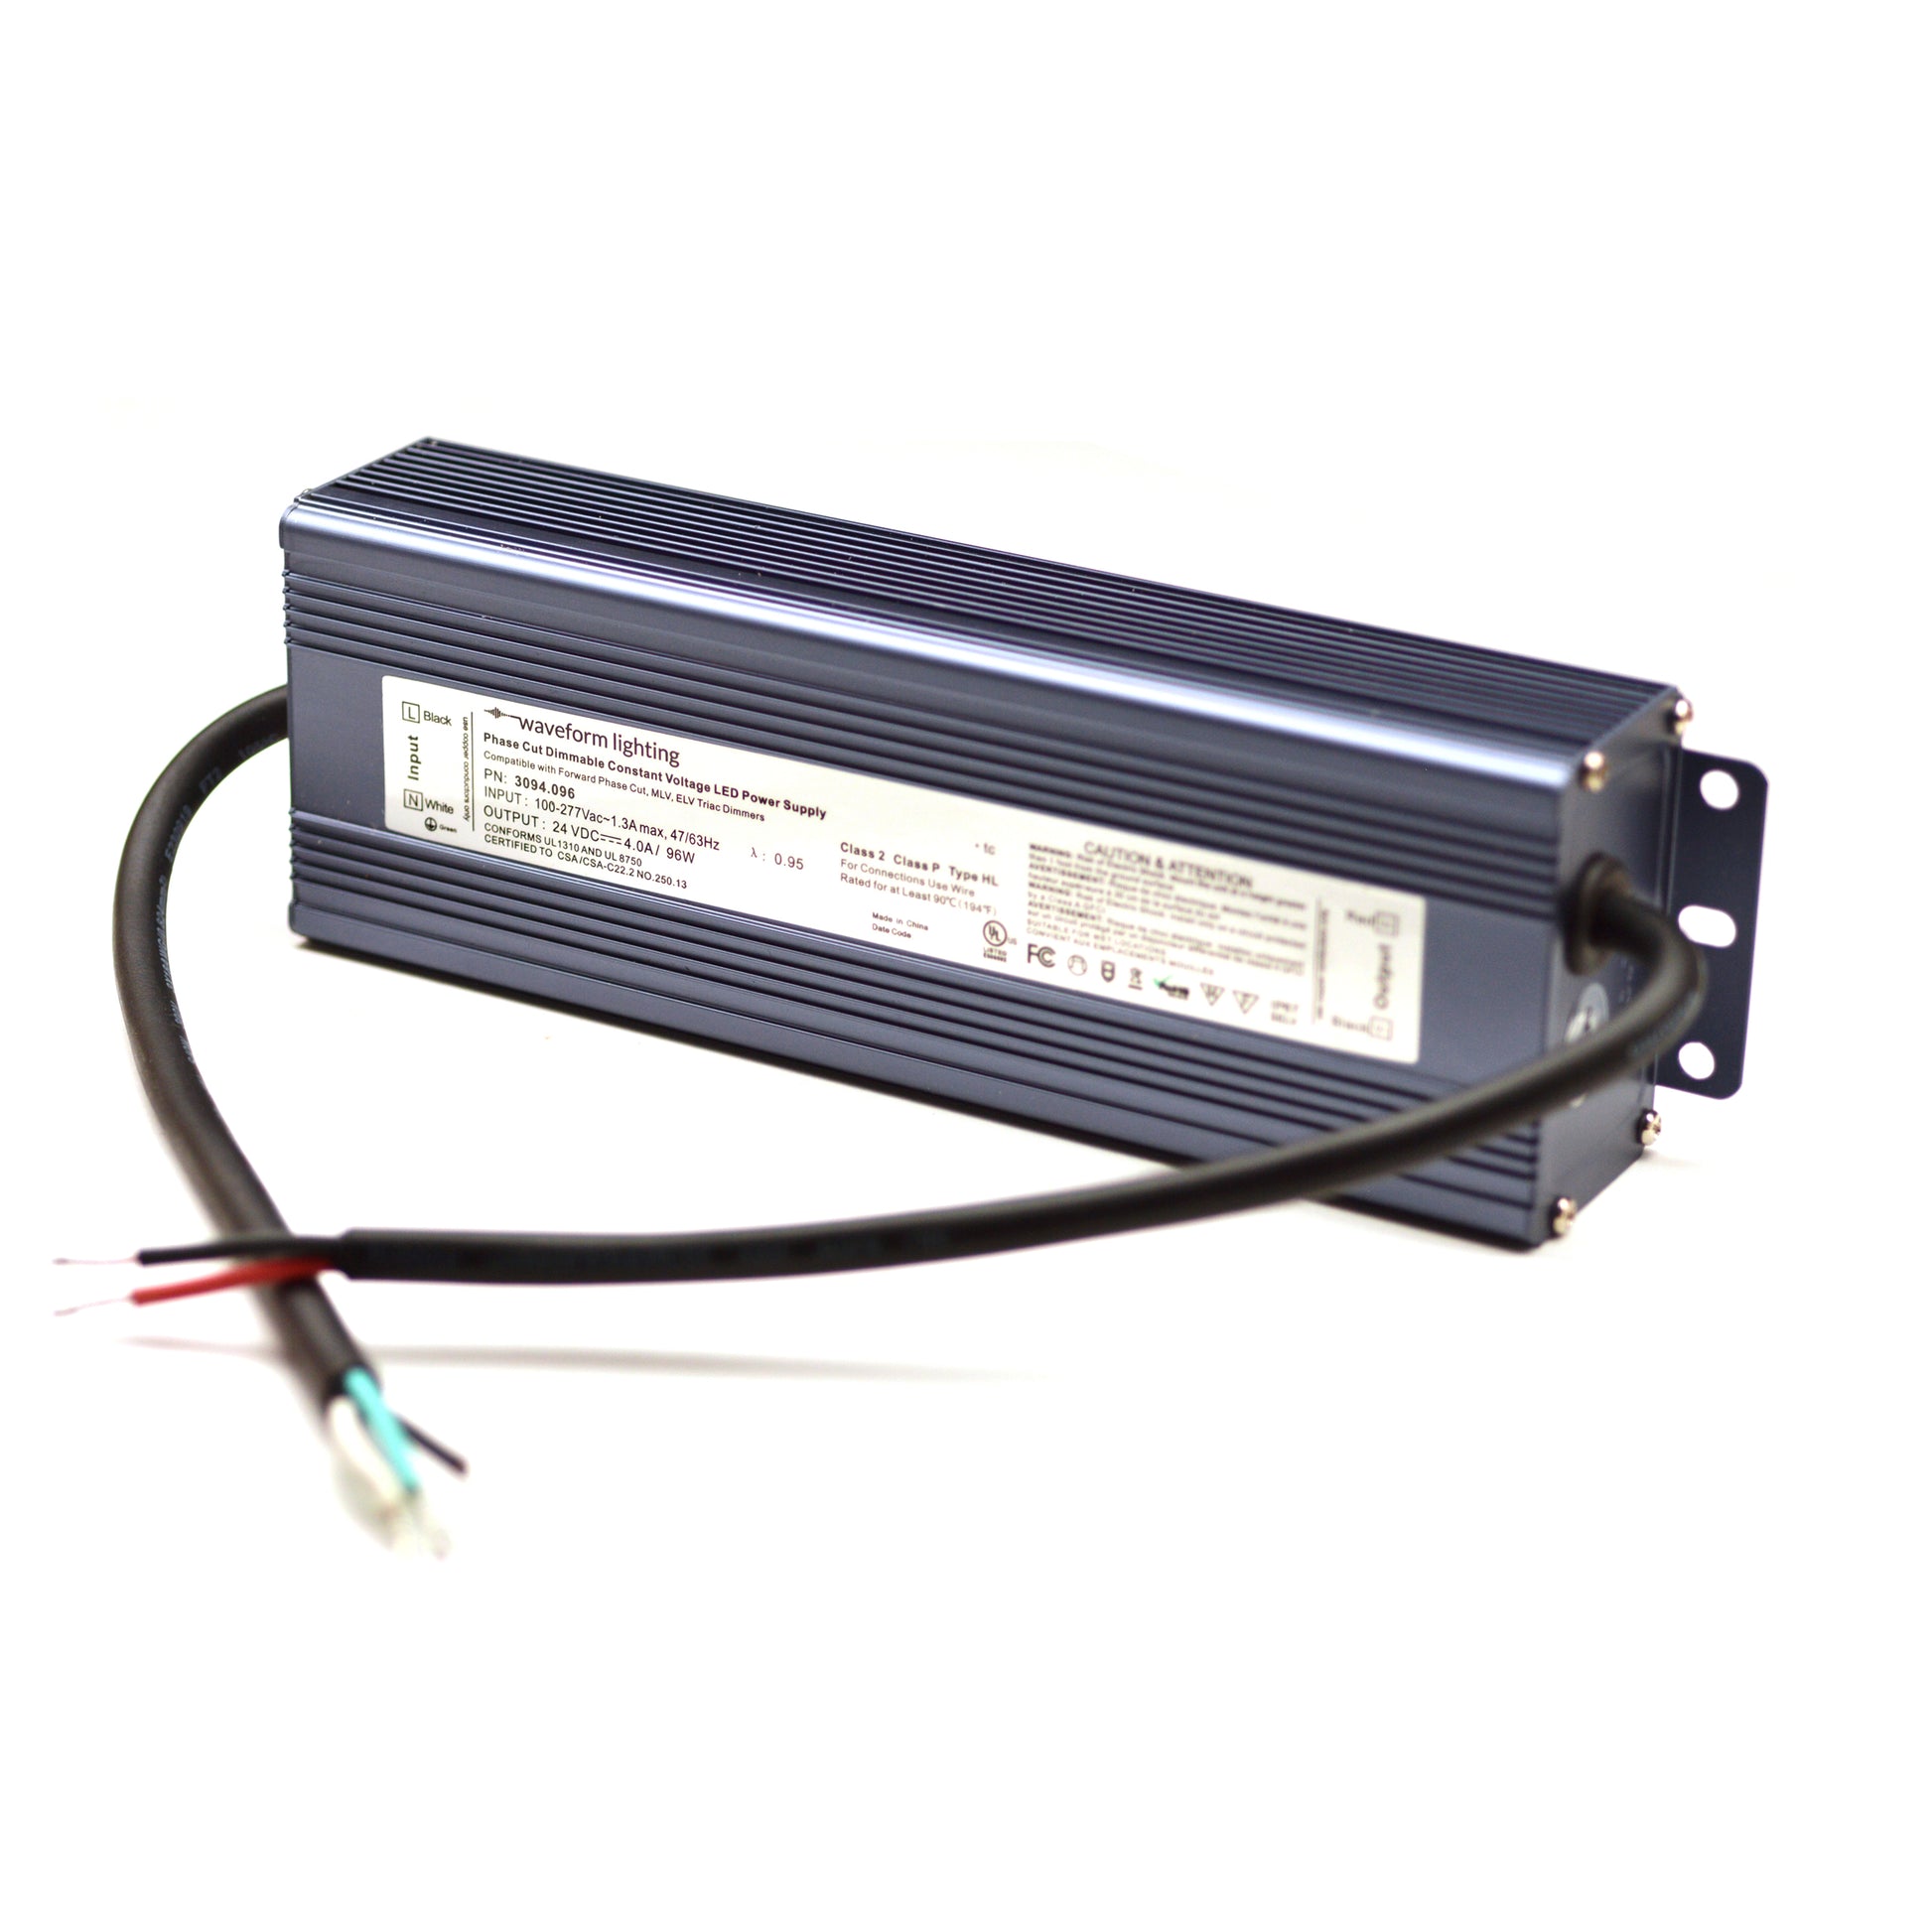 CENTRIC SERIES™ Dimmable Power Supply for LED Strip – Waveform